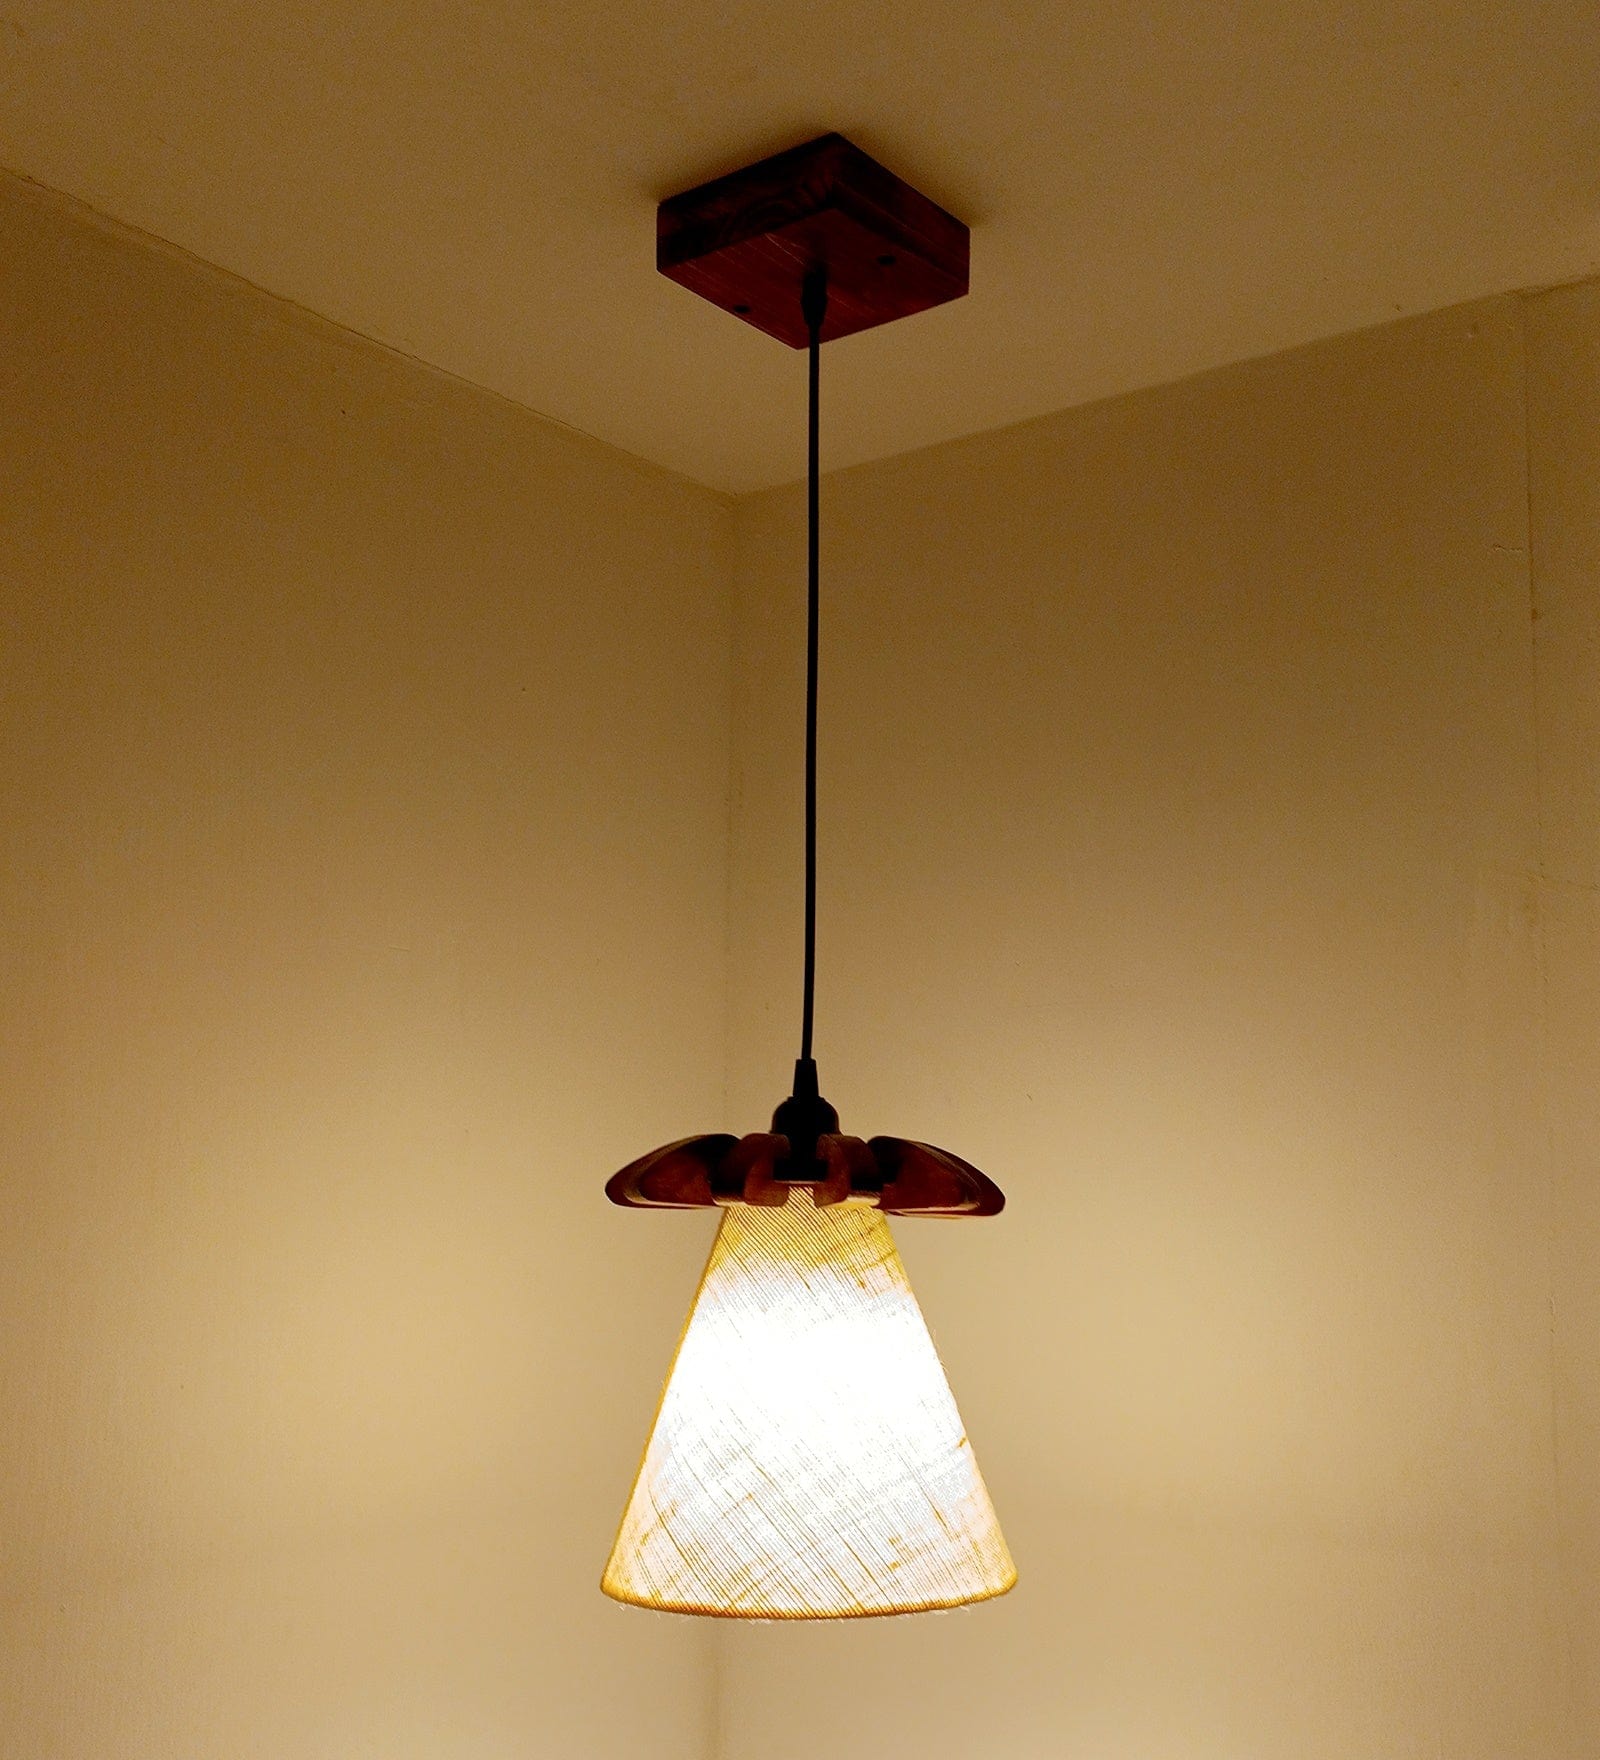 Whirl Brown Wooden Single Hanging Lamp (BULB NOT INCLUDED)